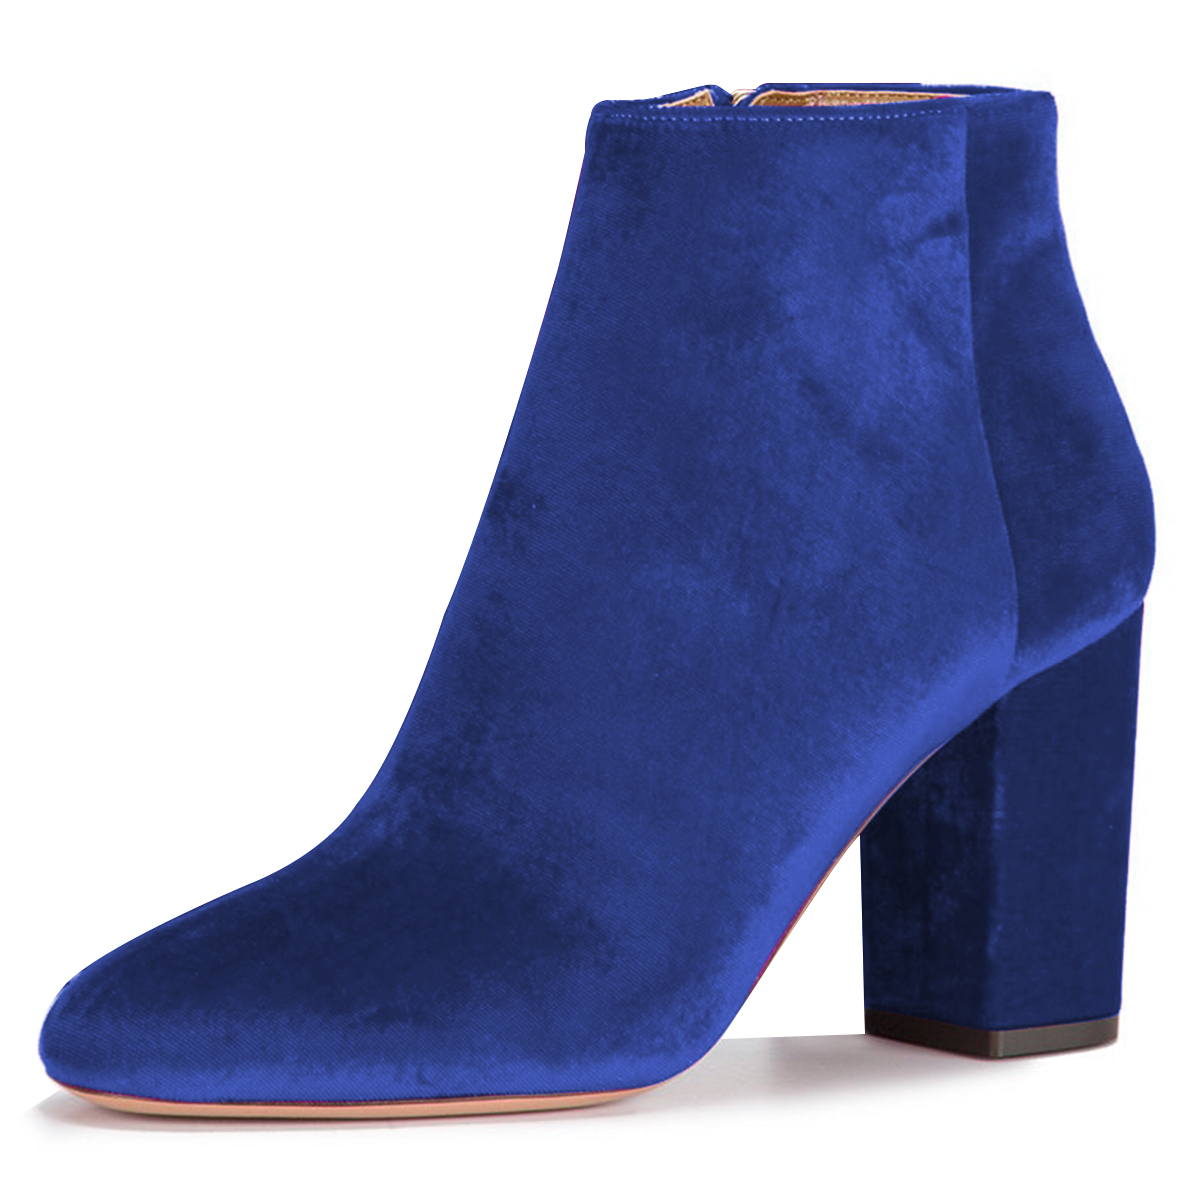 Royal Blue Velvet Boots Round Toe Chunky Heel Office Ankle Boots|FSJshoes